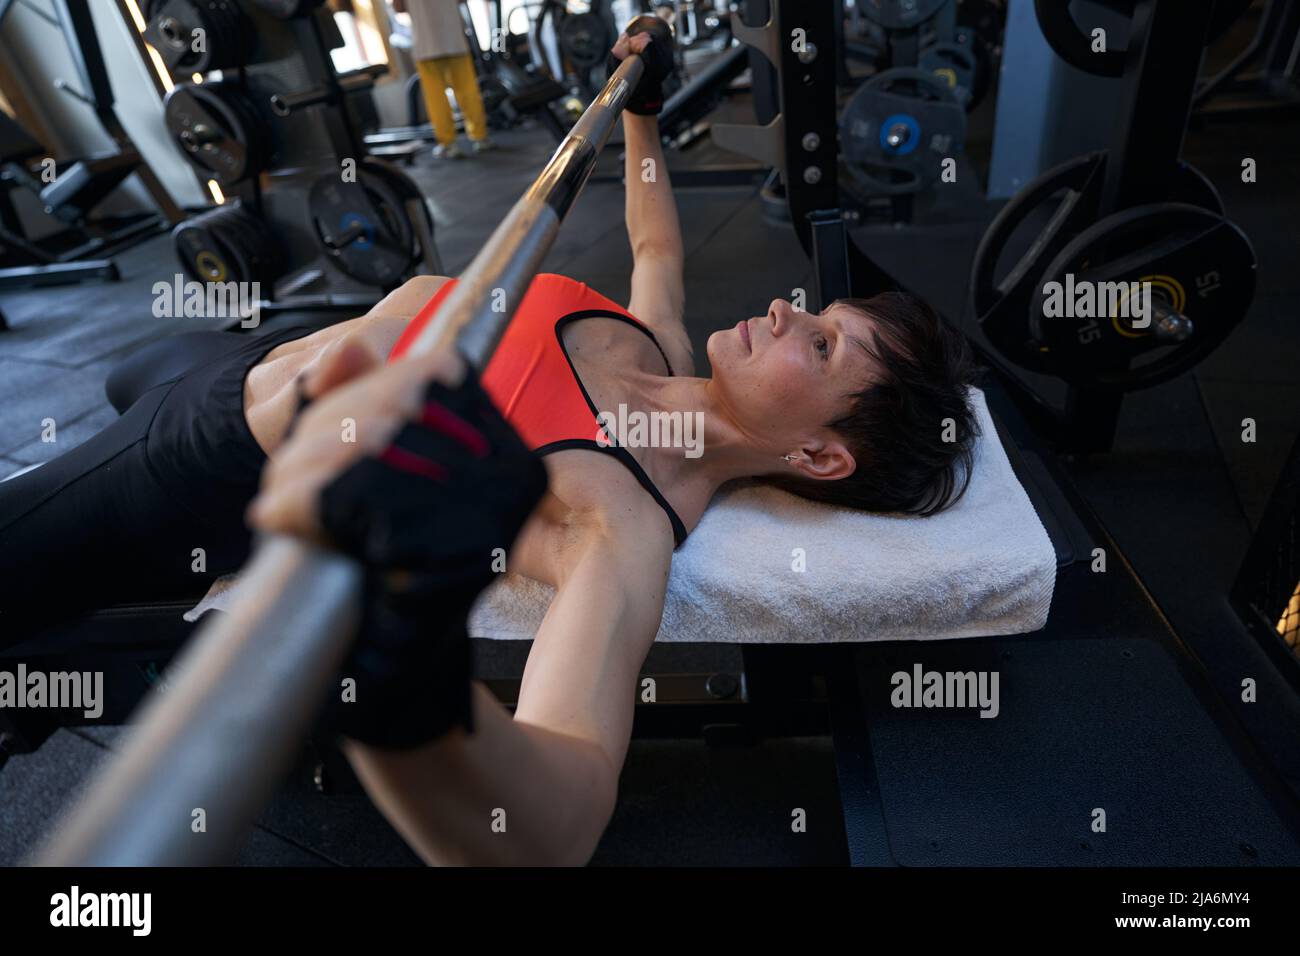 Professional female bodybuilder performing upper-body weight-training exercise Stock Photo